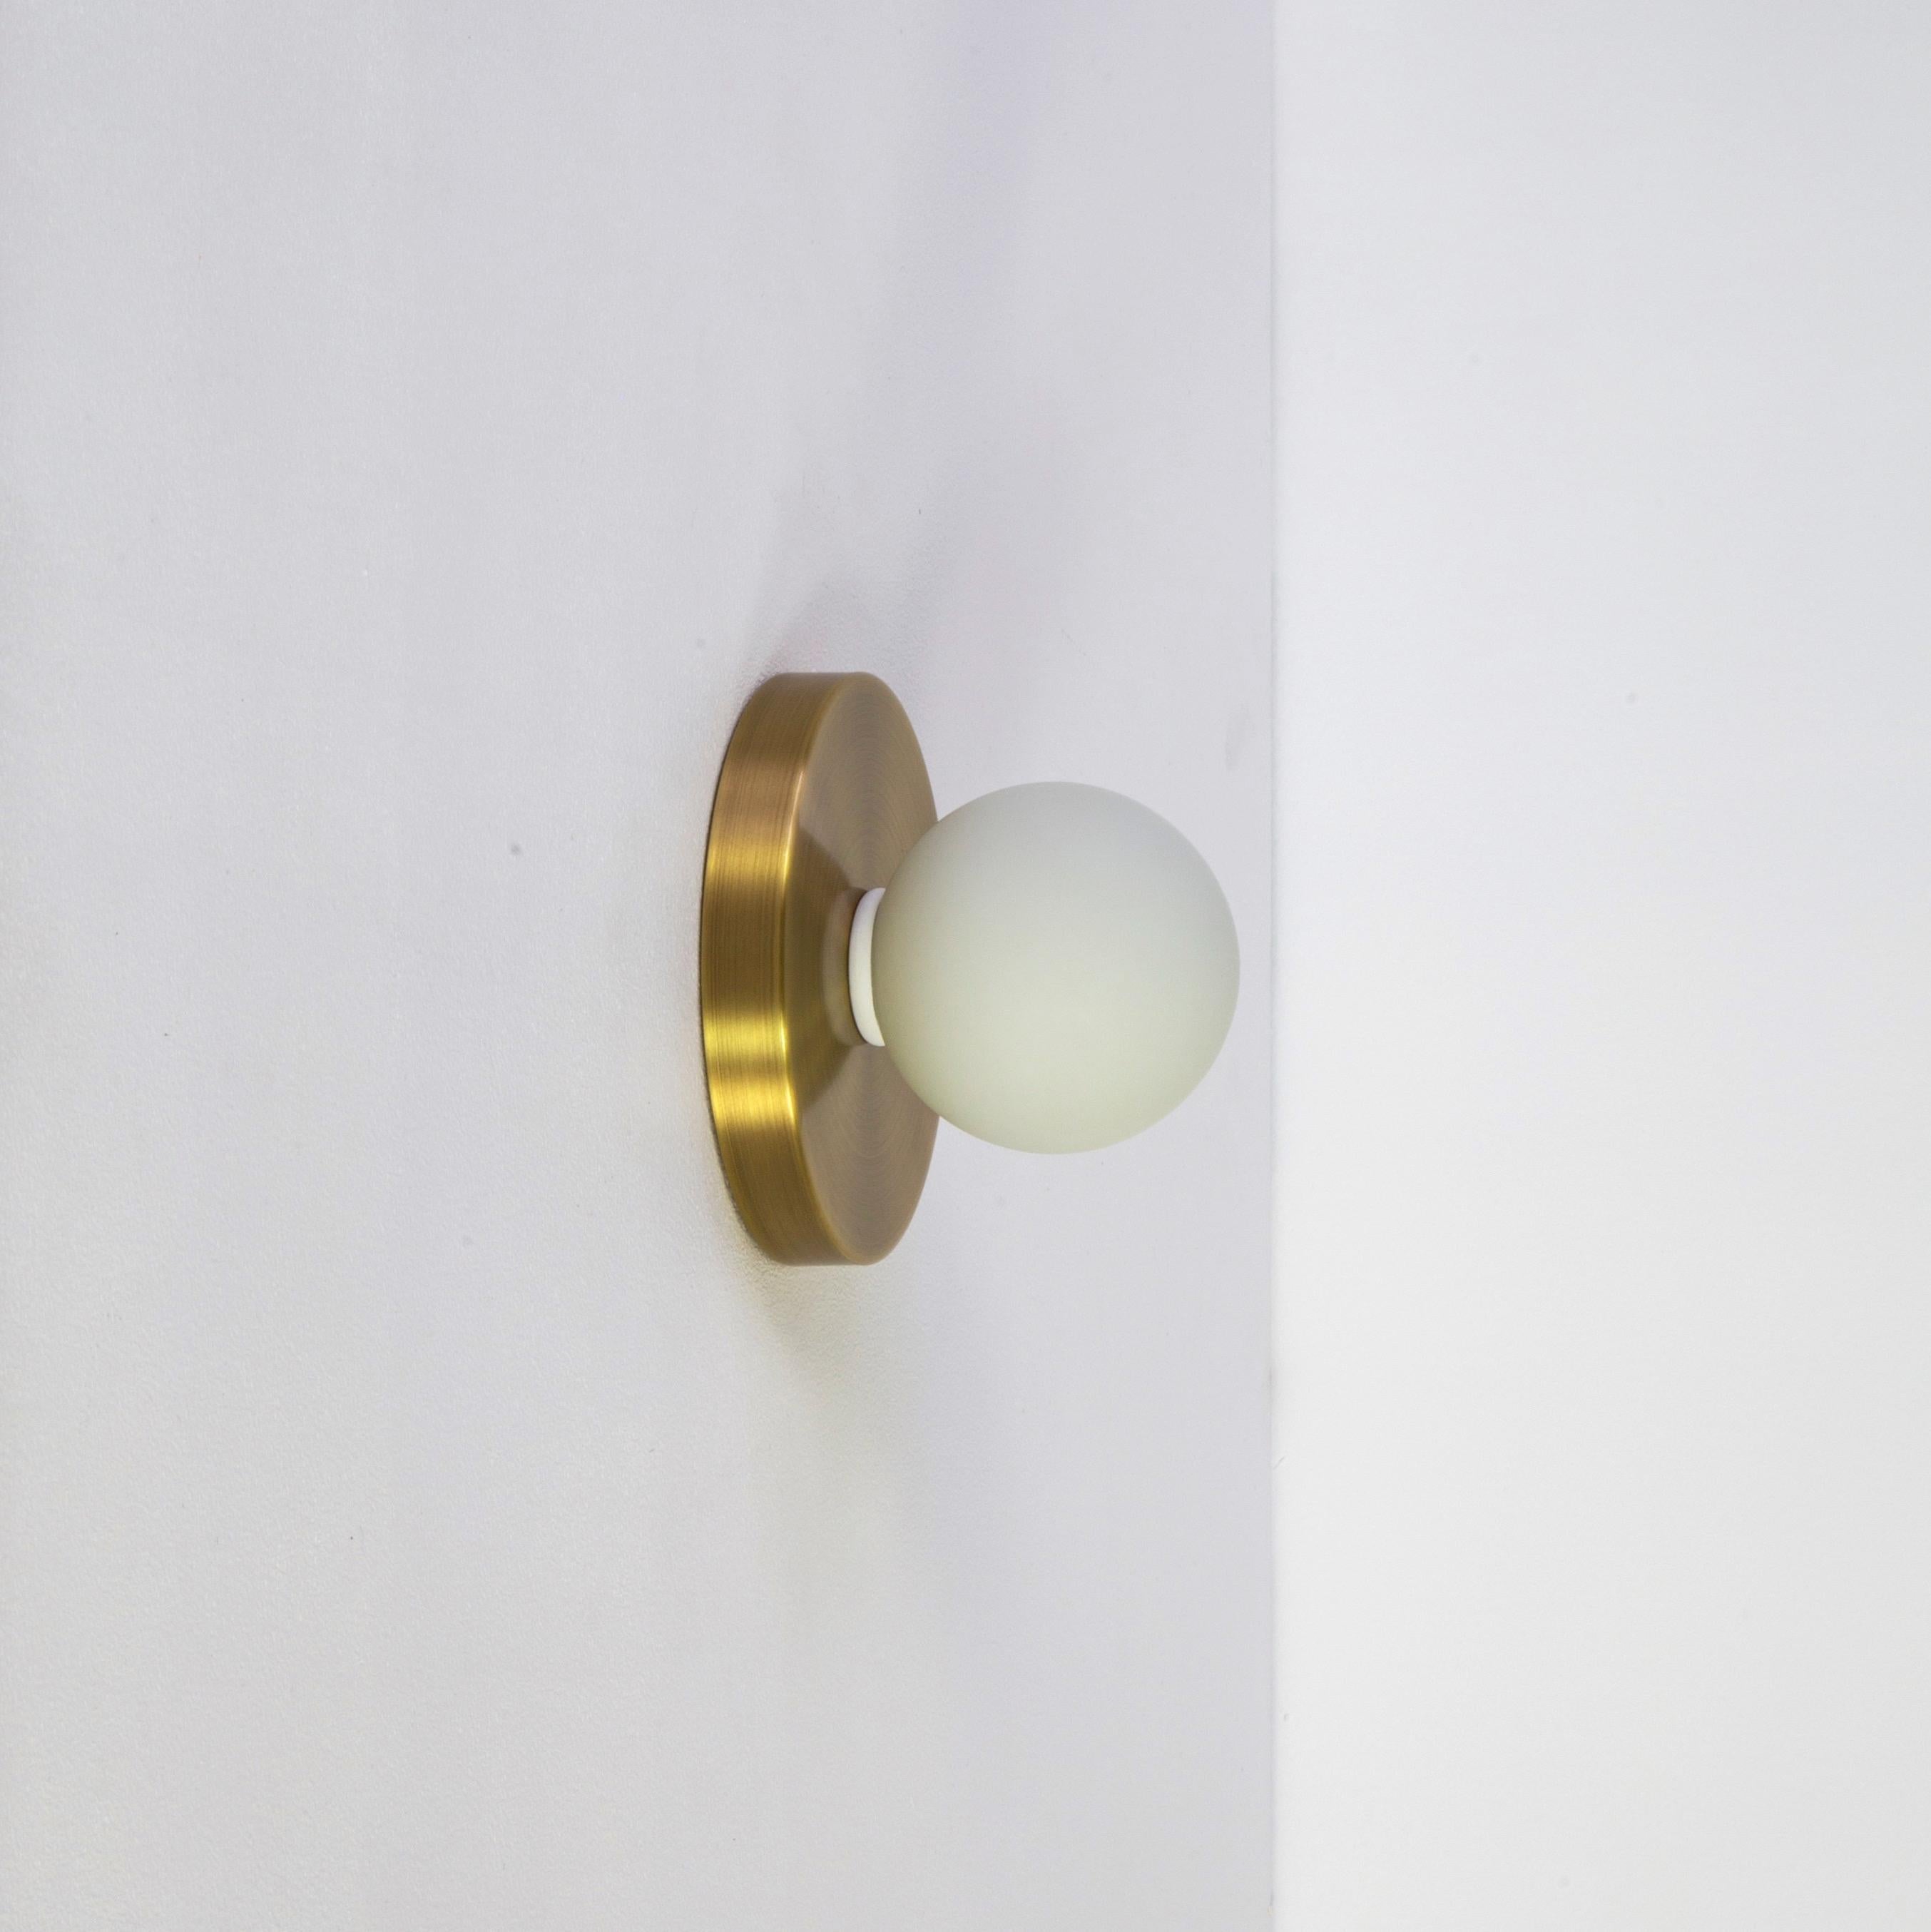 American Pair of Globe Sconces by Research.Lighting, Brushed Brass, In Stock For Sale